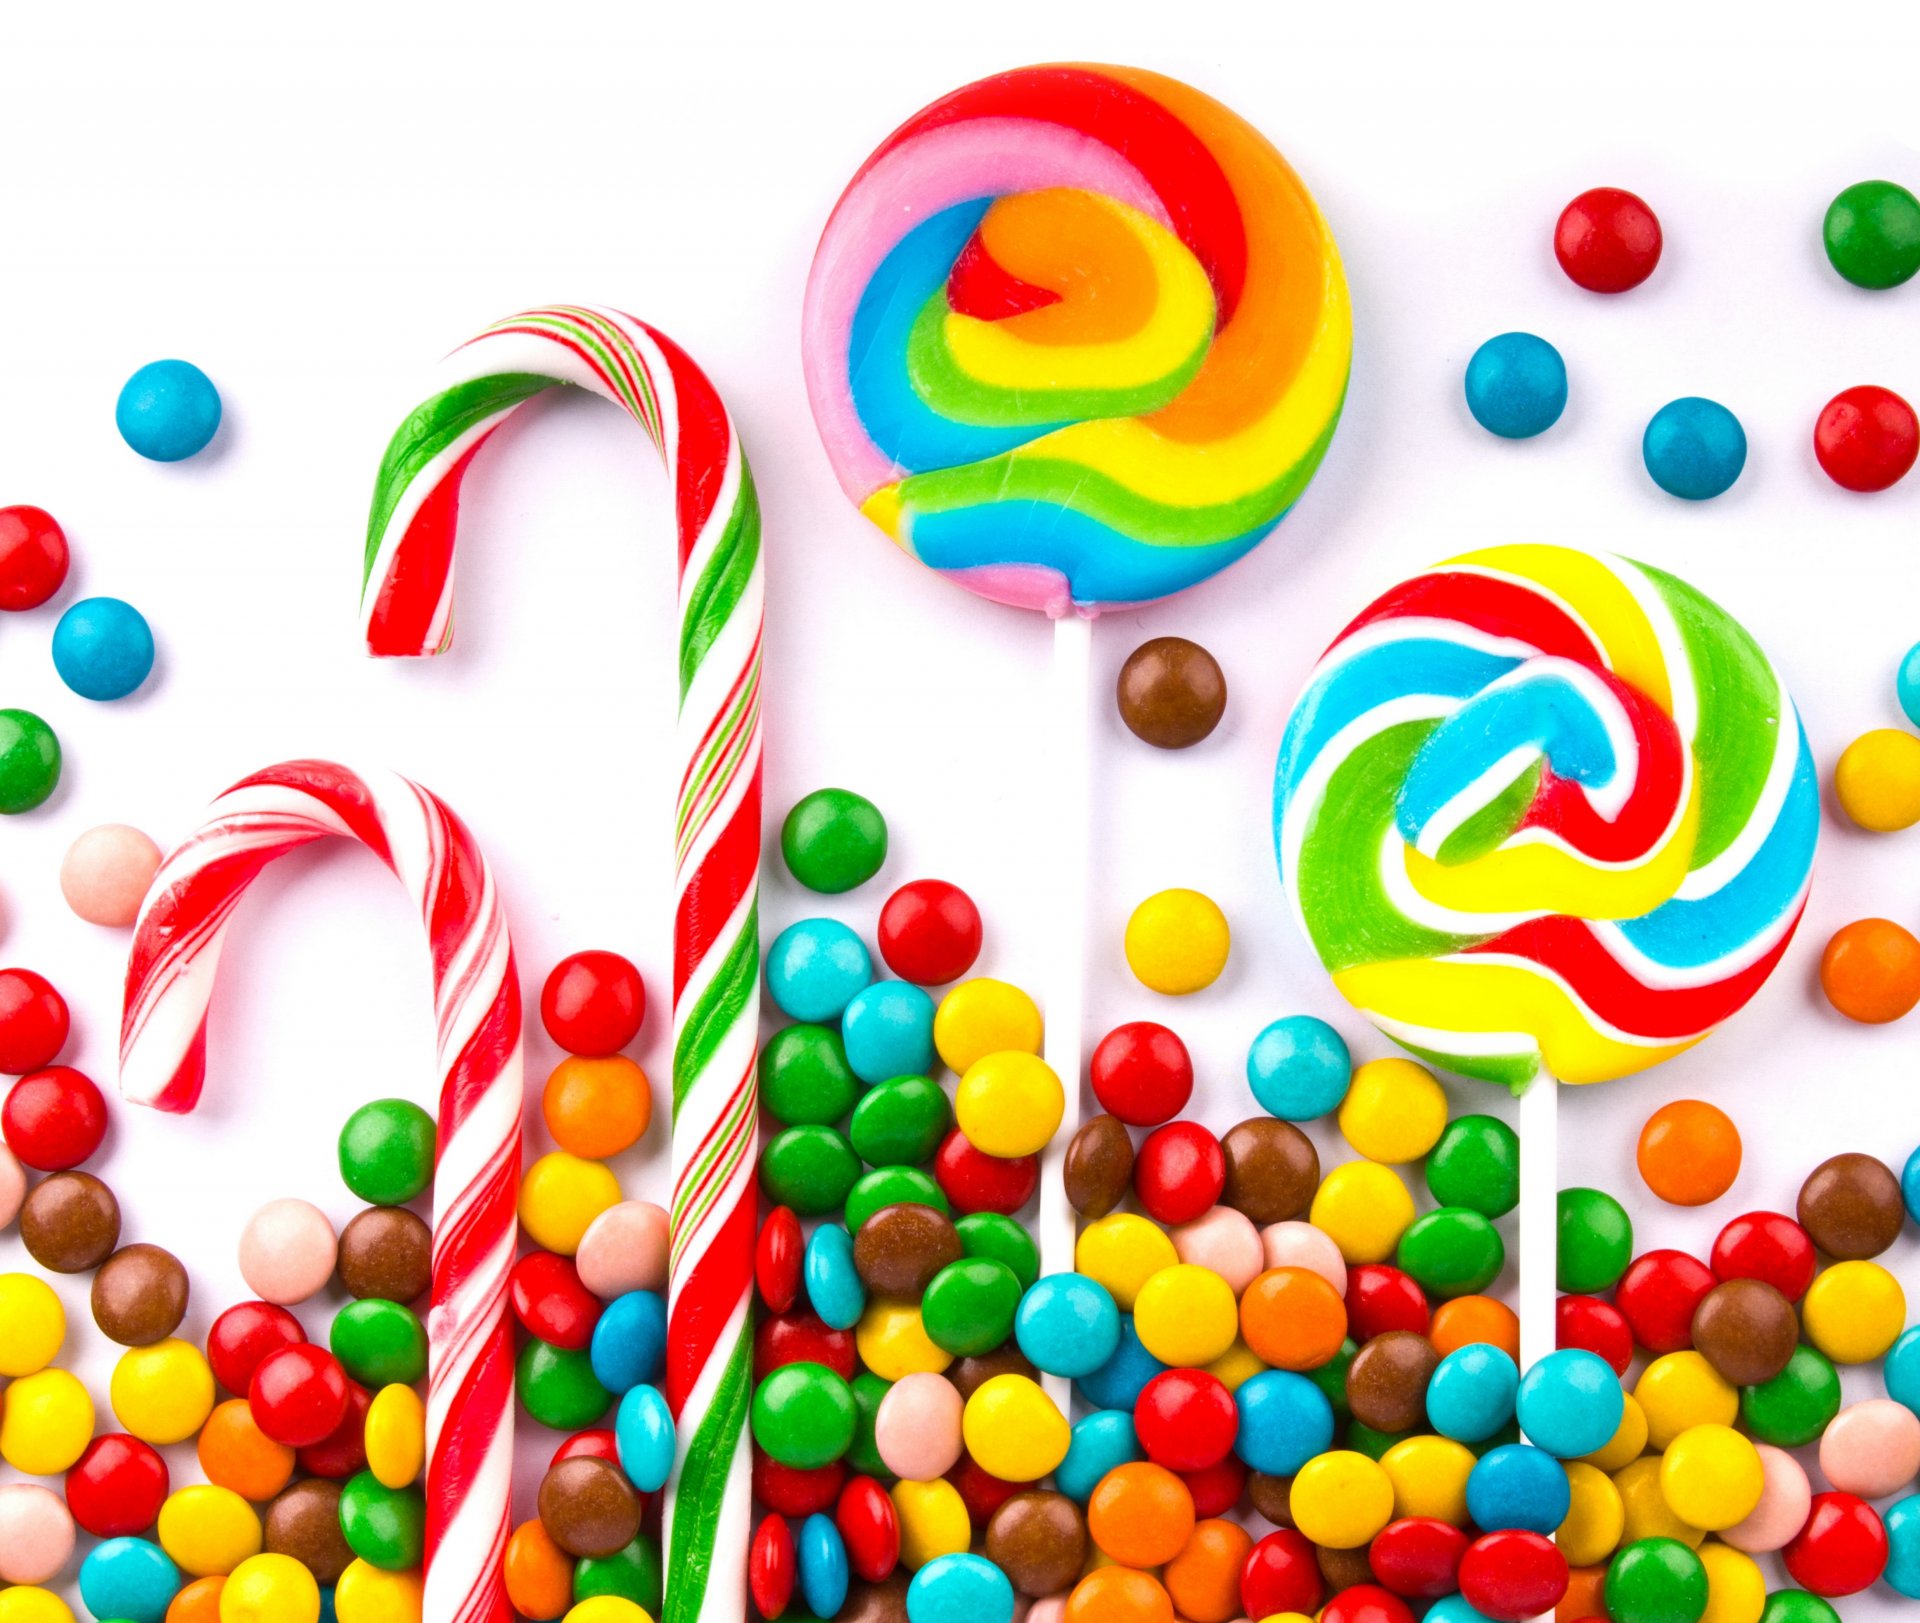 candy wallpaper hd,confectionery,sweetness,food,candy,sprinkles